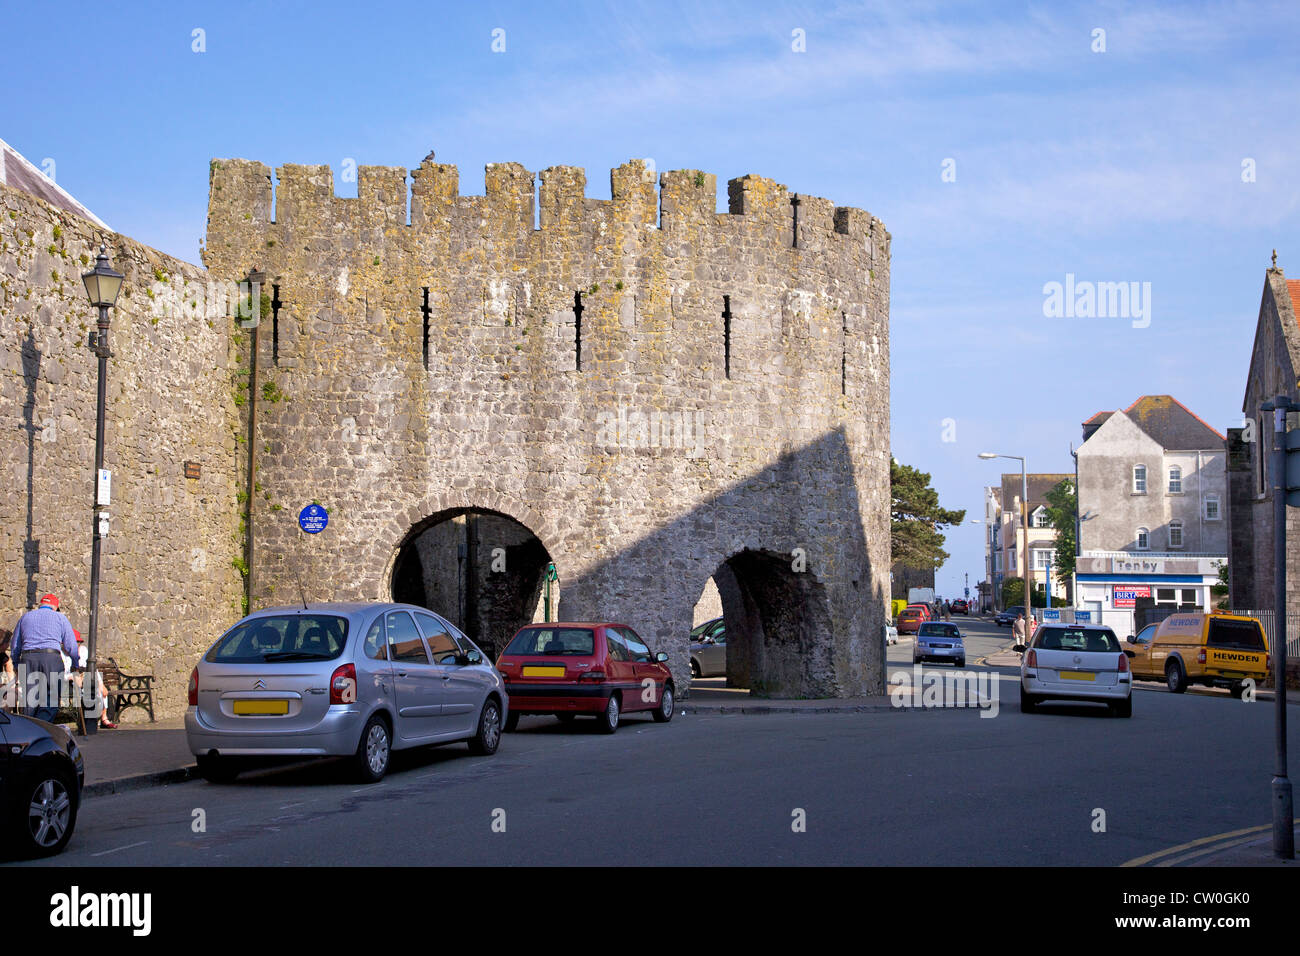 Five Arches, part of the fortified town walls in Tenby, Pembrokeshire National Park, West Wales, Cymru, UK, United Kingdom, GB, Stock Photo